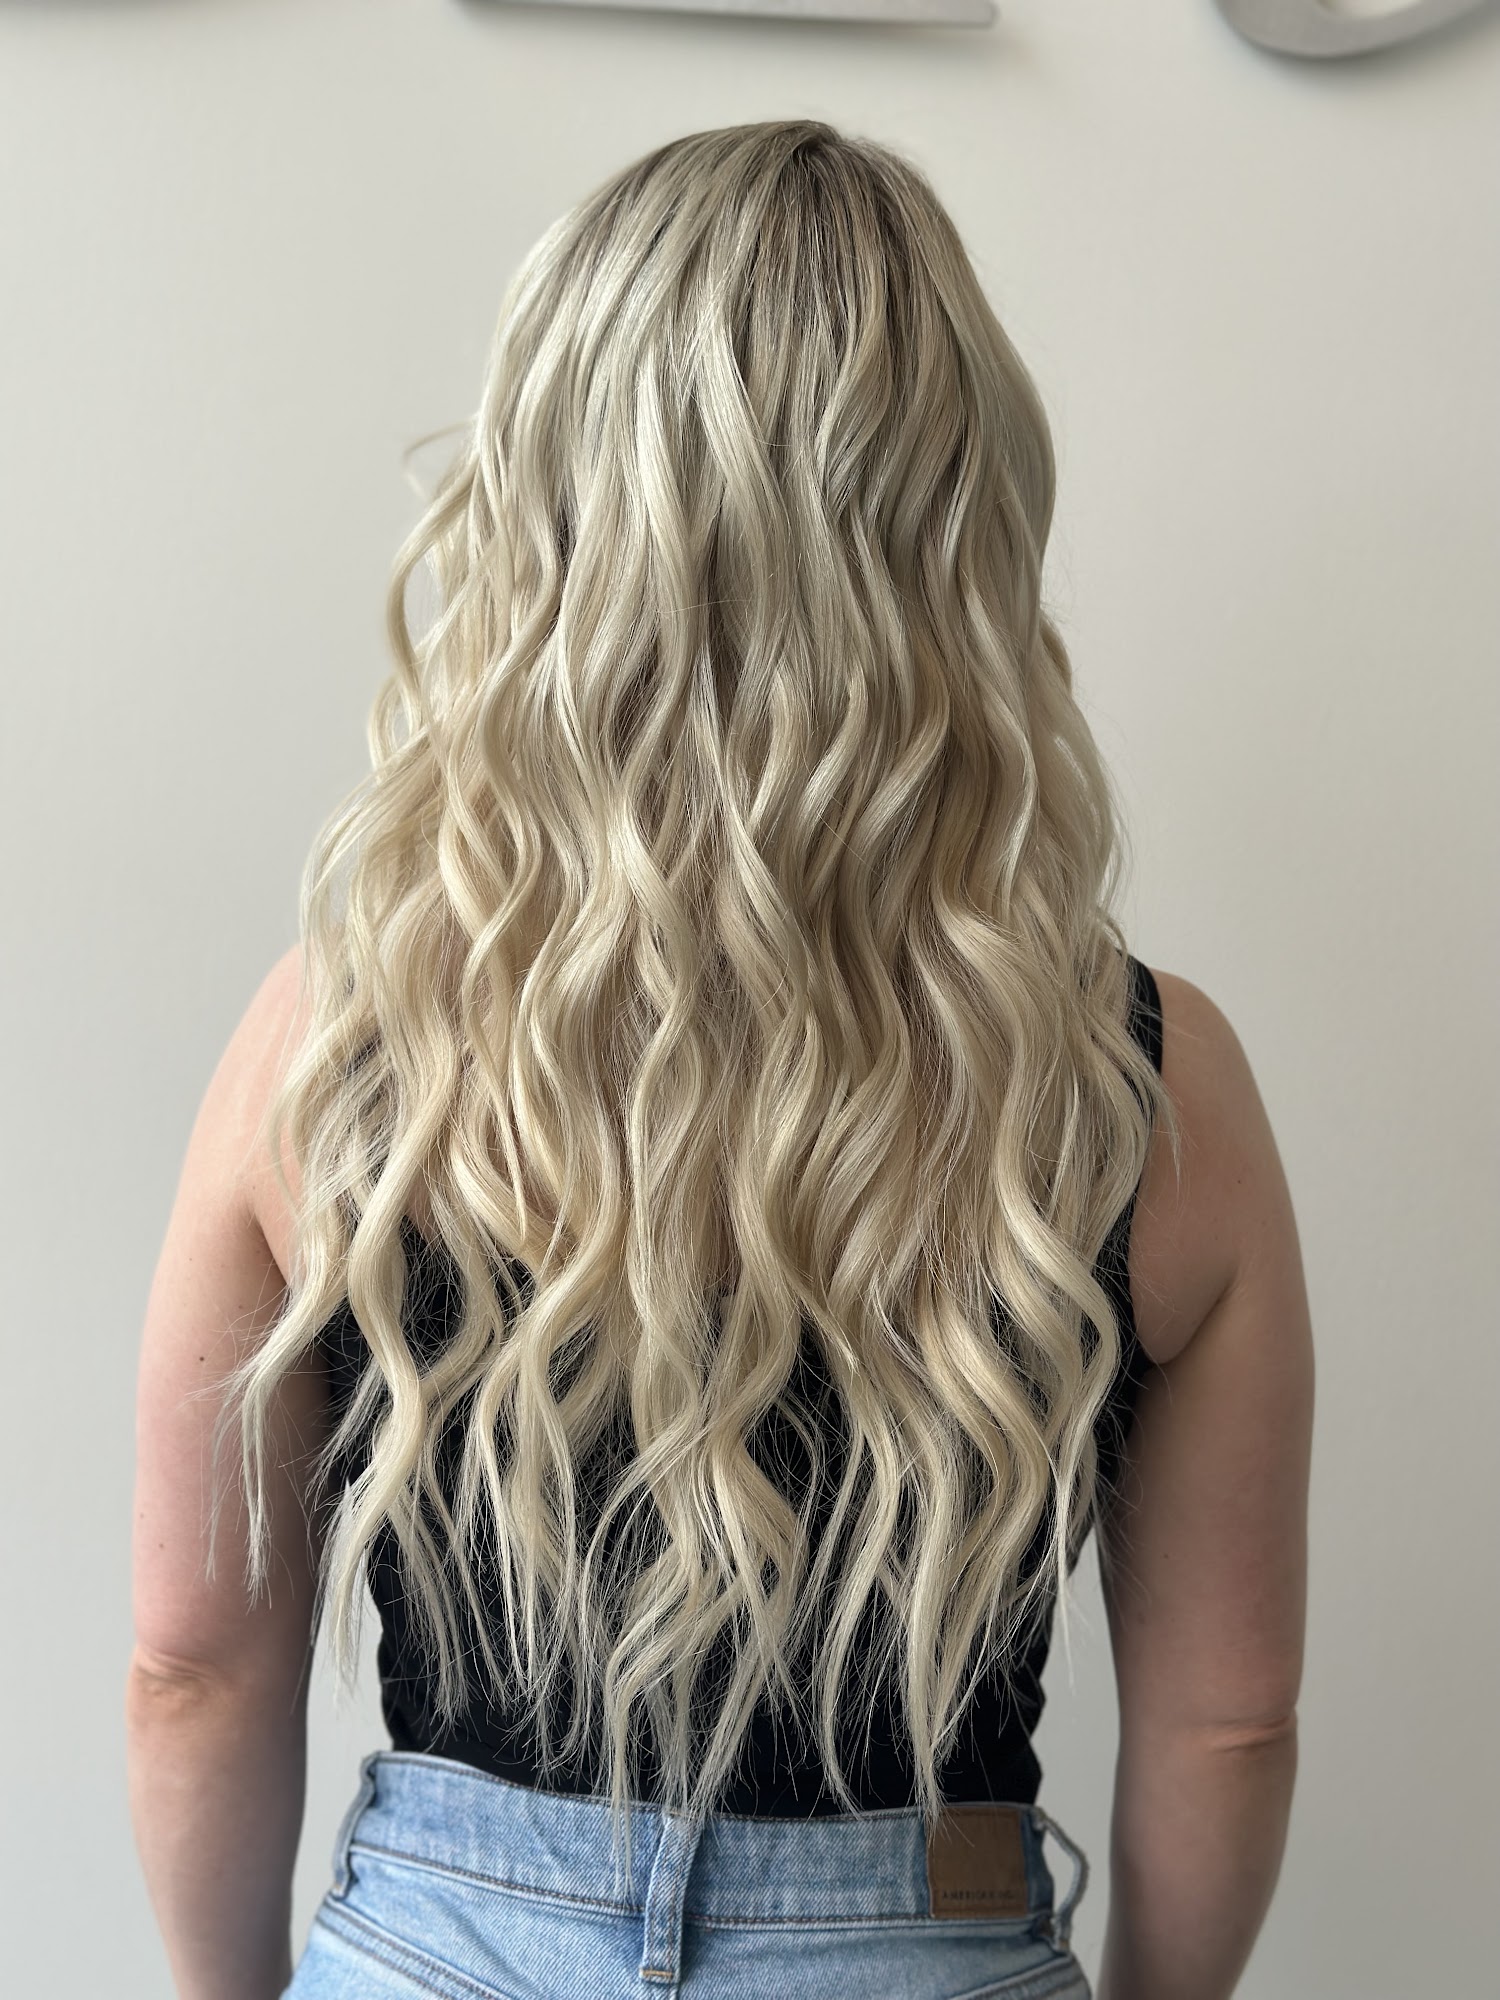 Hair By Taylor Force - Extension Specialist